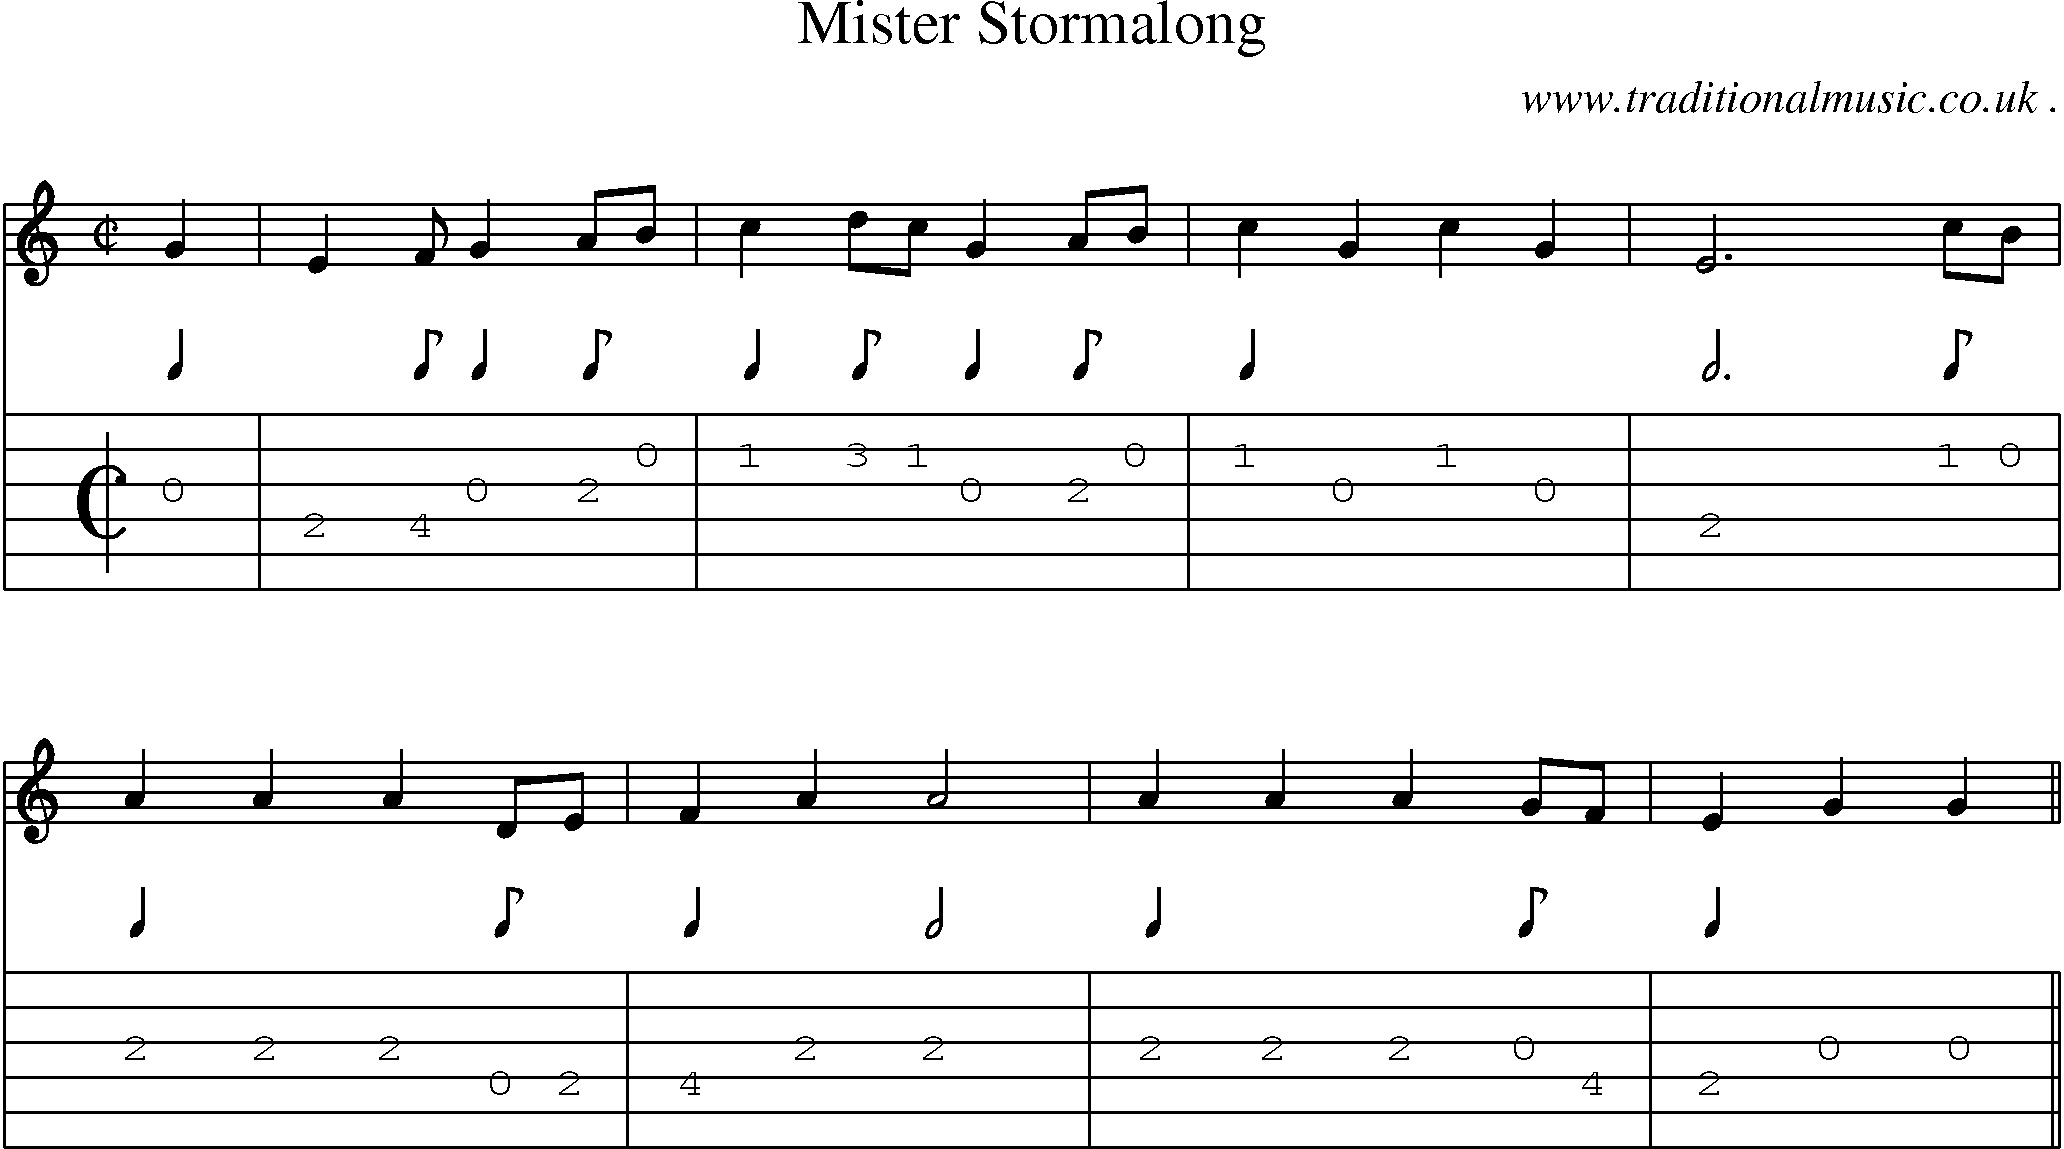 Sheet-Music and Guitar Tabs for Mister Stormalong